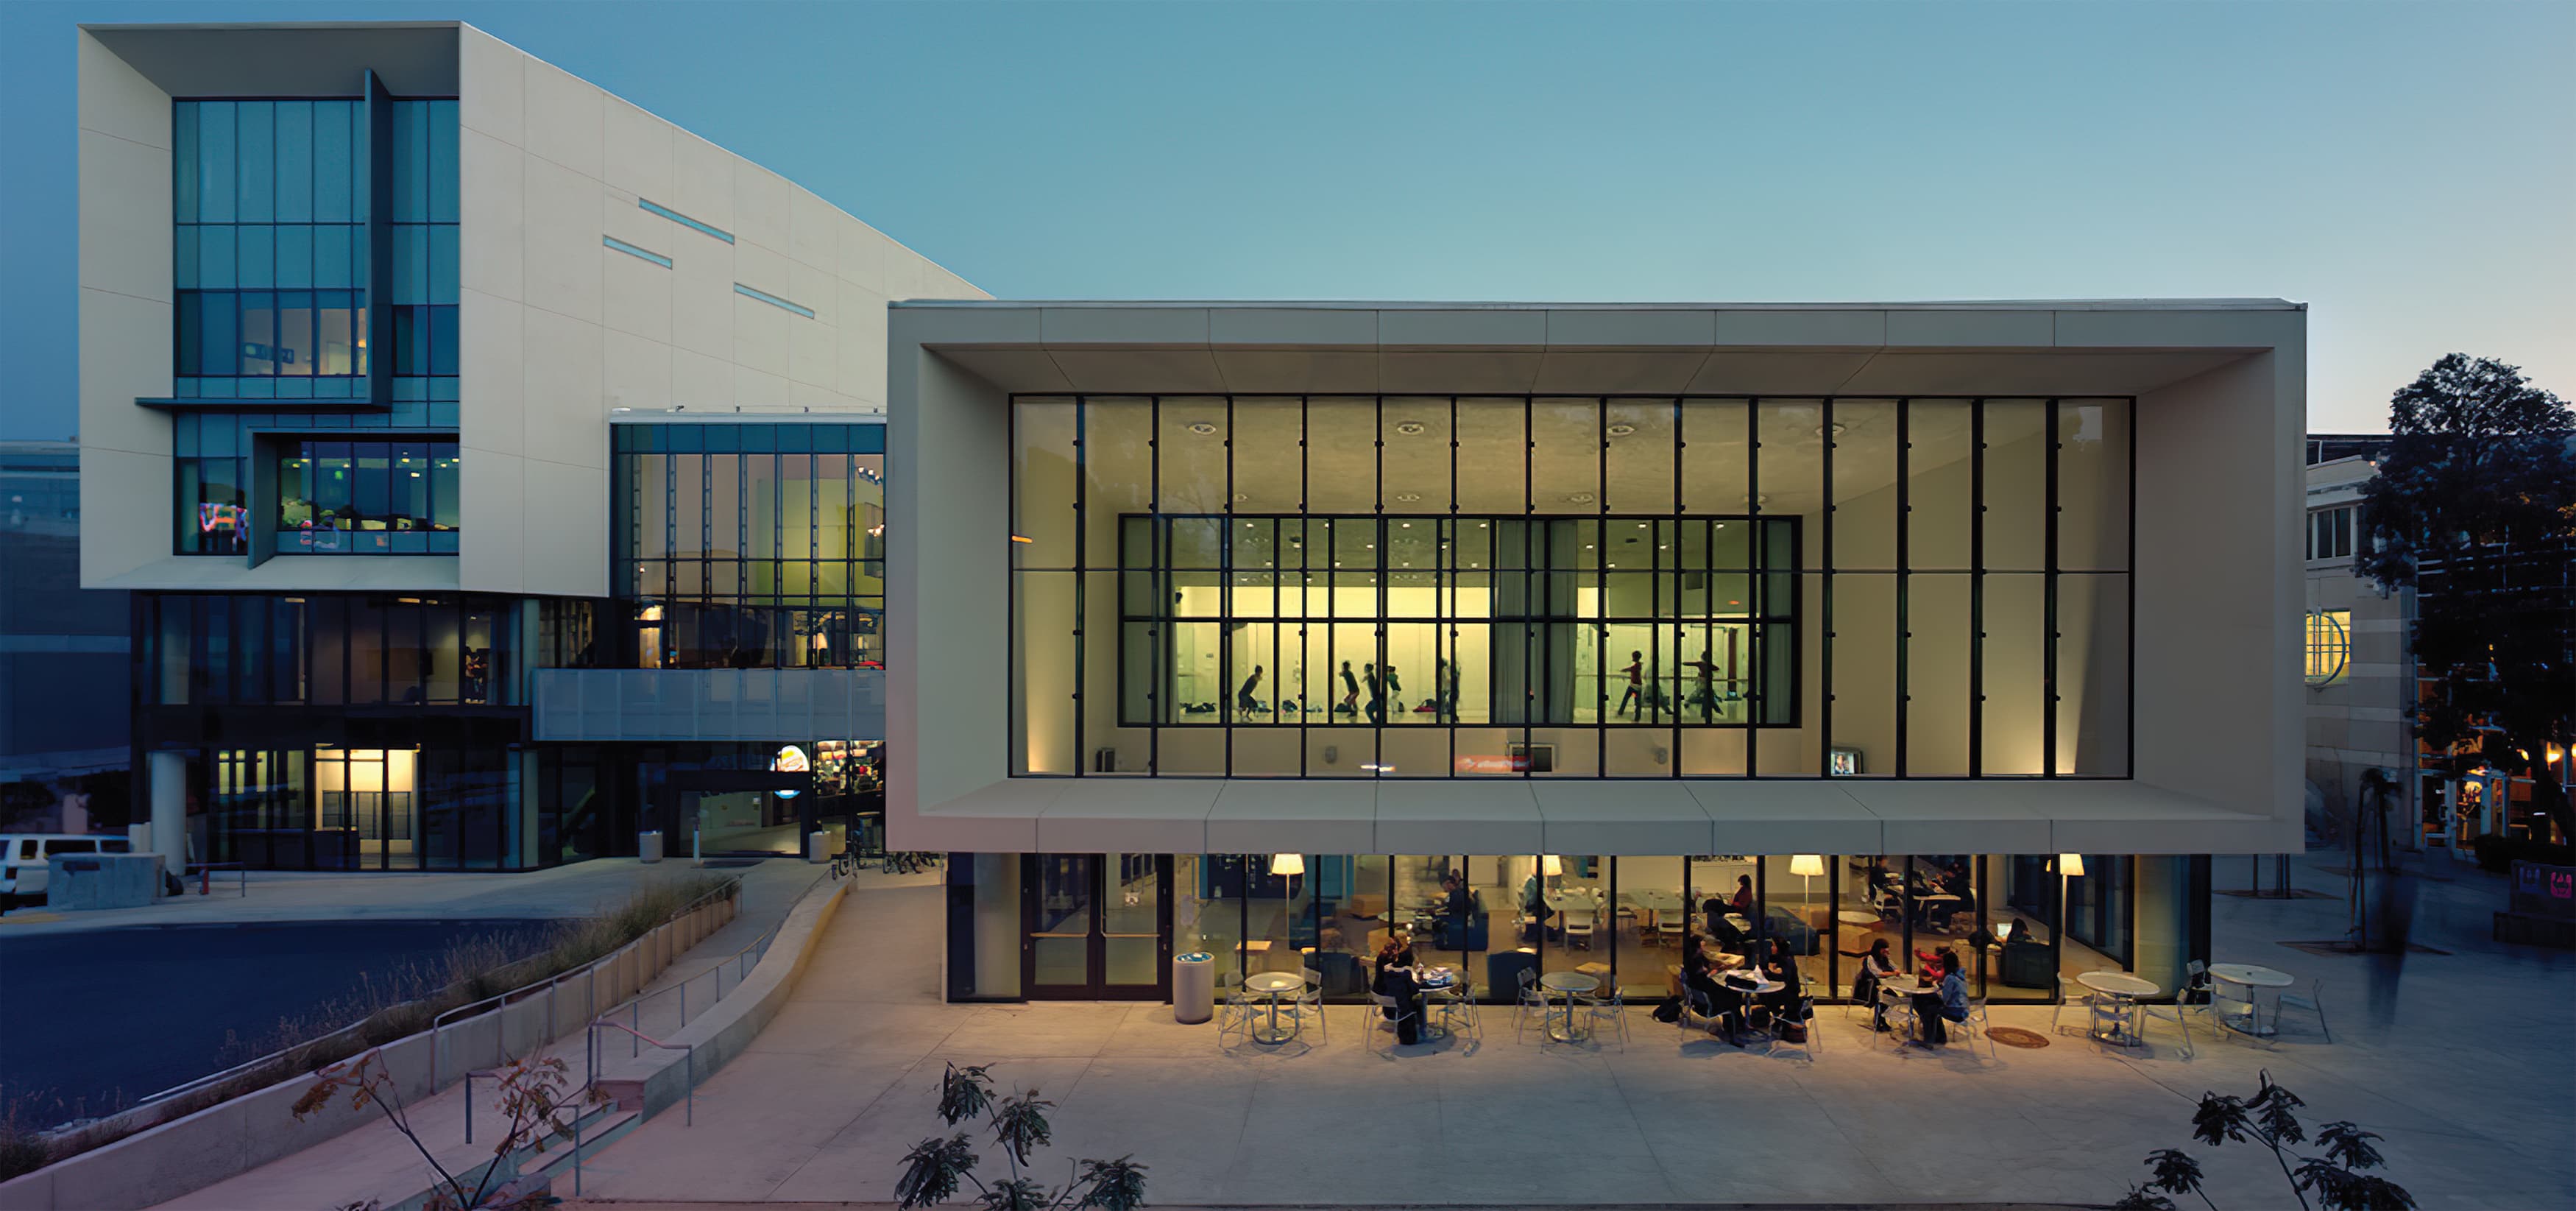 The Price Center, at the University of California, San Diego.